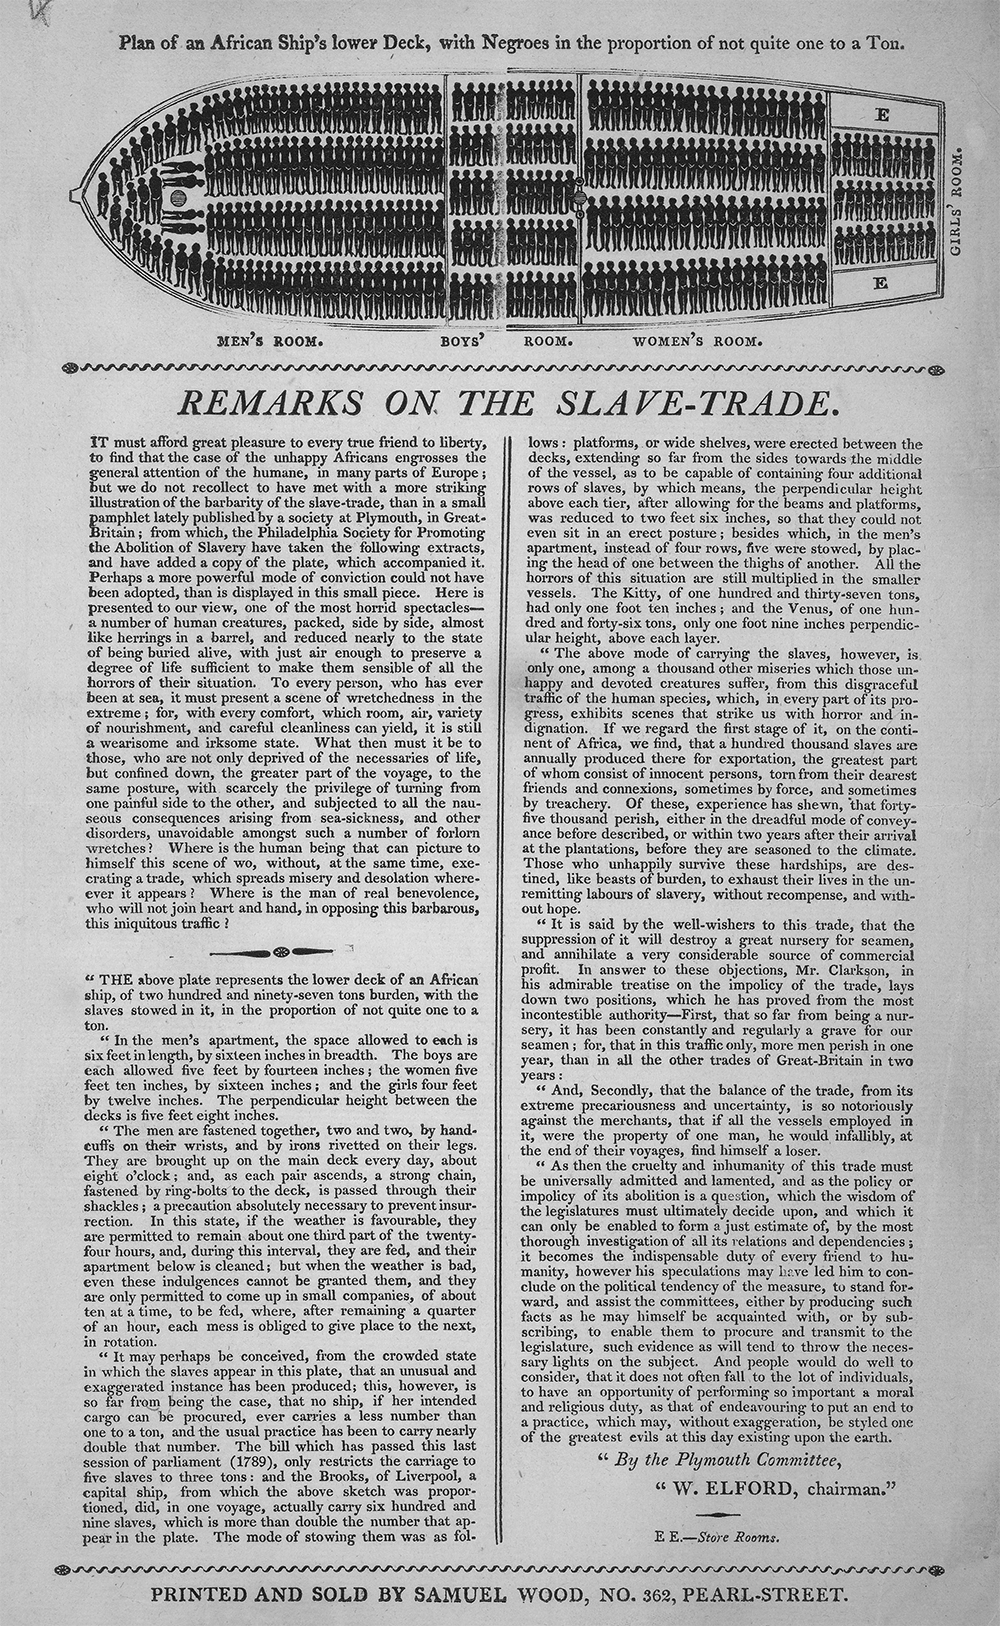 “Remarks on the Slave-Trade,” printed by Samuel Wood, 1807. Library of Congress, Broadsides, Leaflets, and Pamphlets from America and Europe.